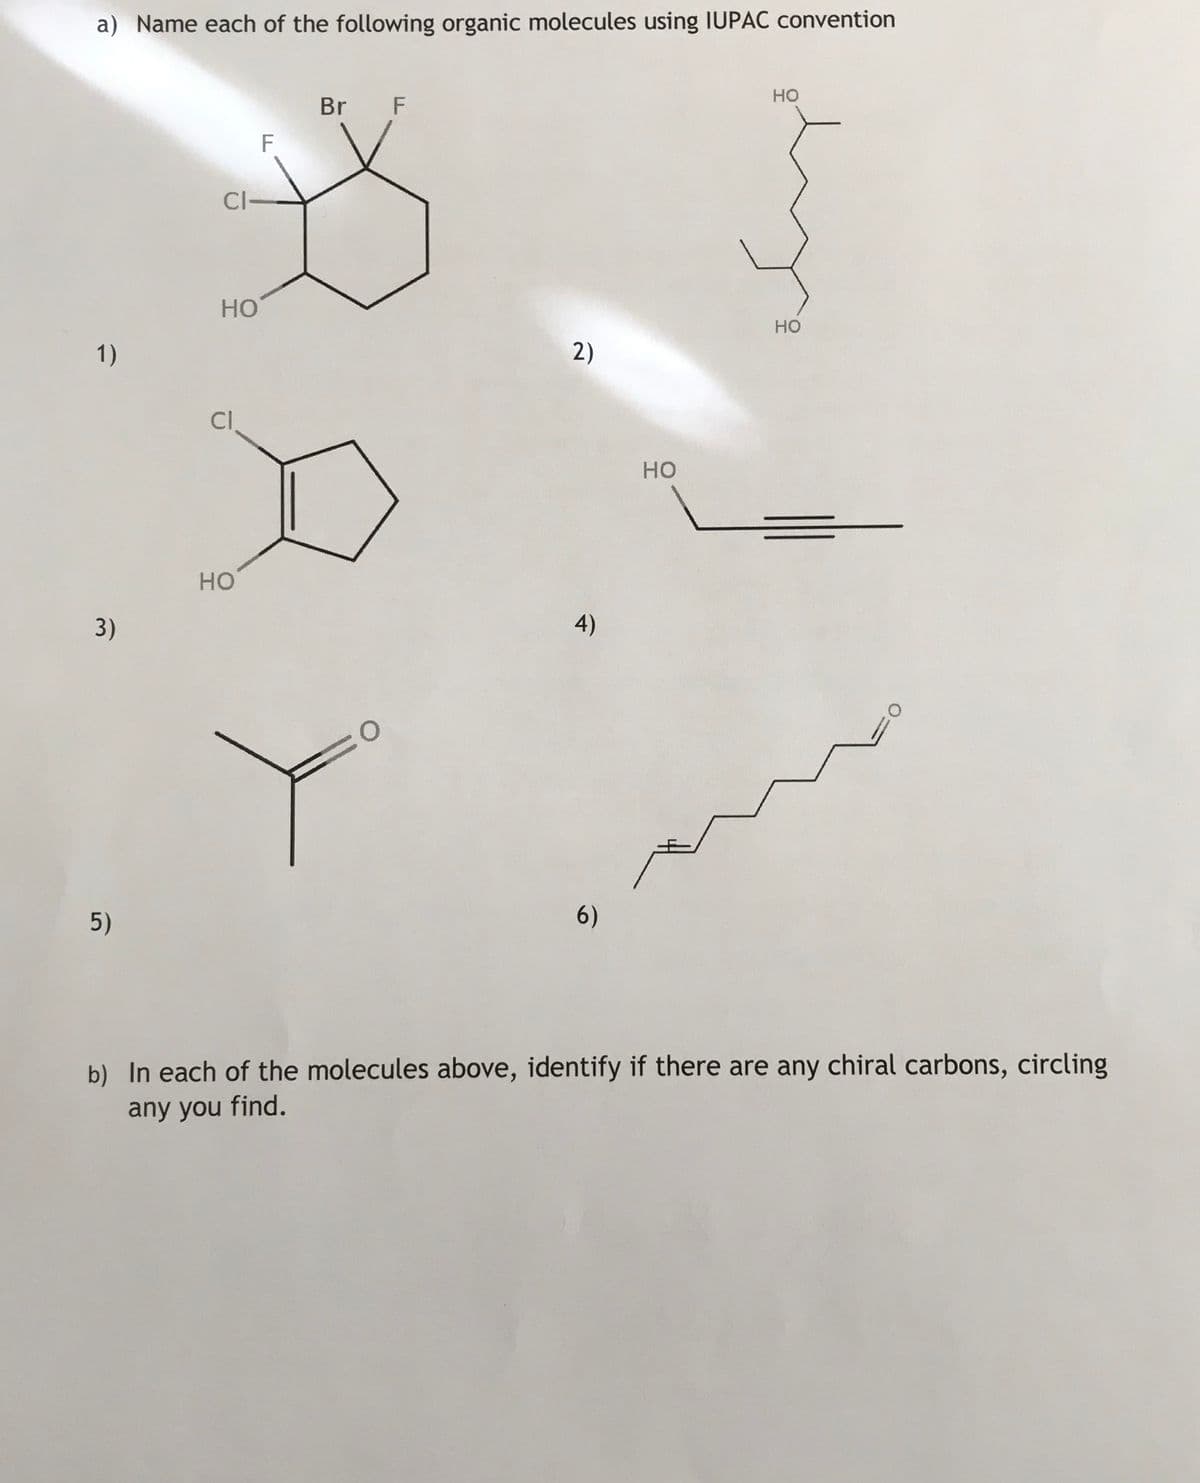 a) Name each of the following organic molecules using IUPAC convention
но
Br F
CI-
Но
но
1)
2)
Cl
но
но
3)
4)
5)
6)
b) In each of the molecules above, identify if there are any chiral carbons, circling
any you find.
